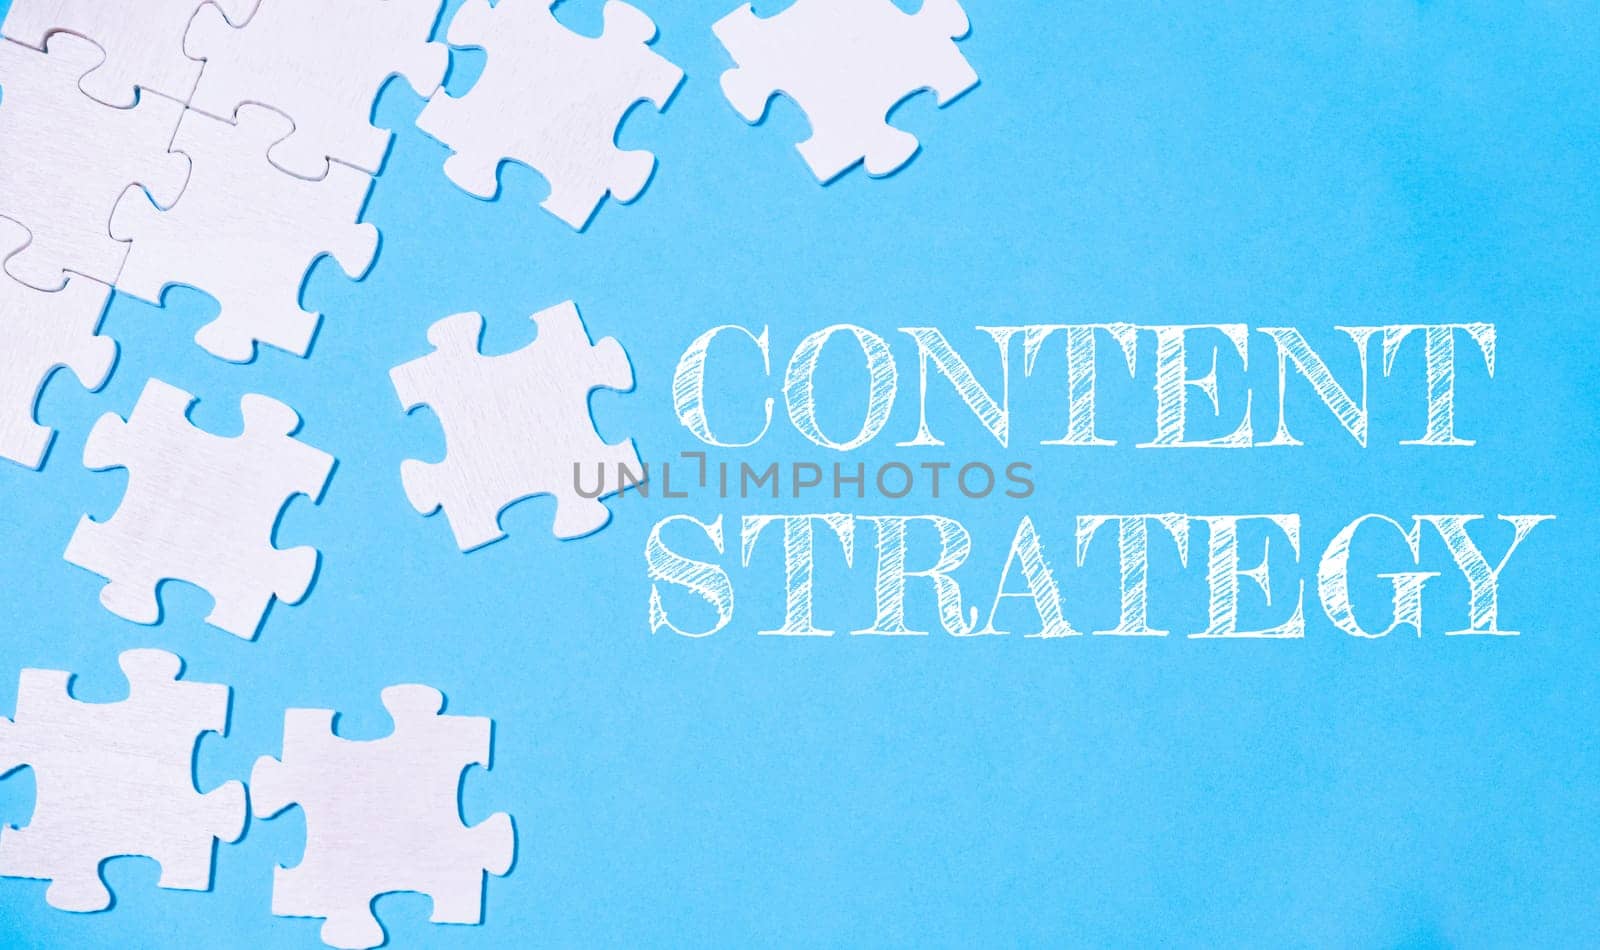 A jigsaw puzzle with the word content strategy written on it. The puzzle pieces are scattered across the image, creating a sense of disarray and complexity